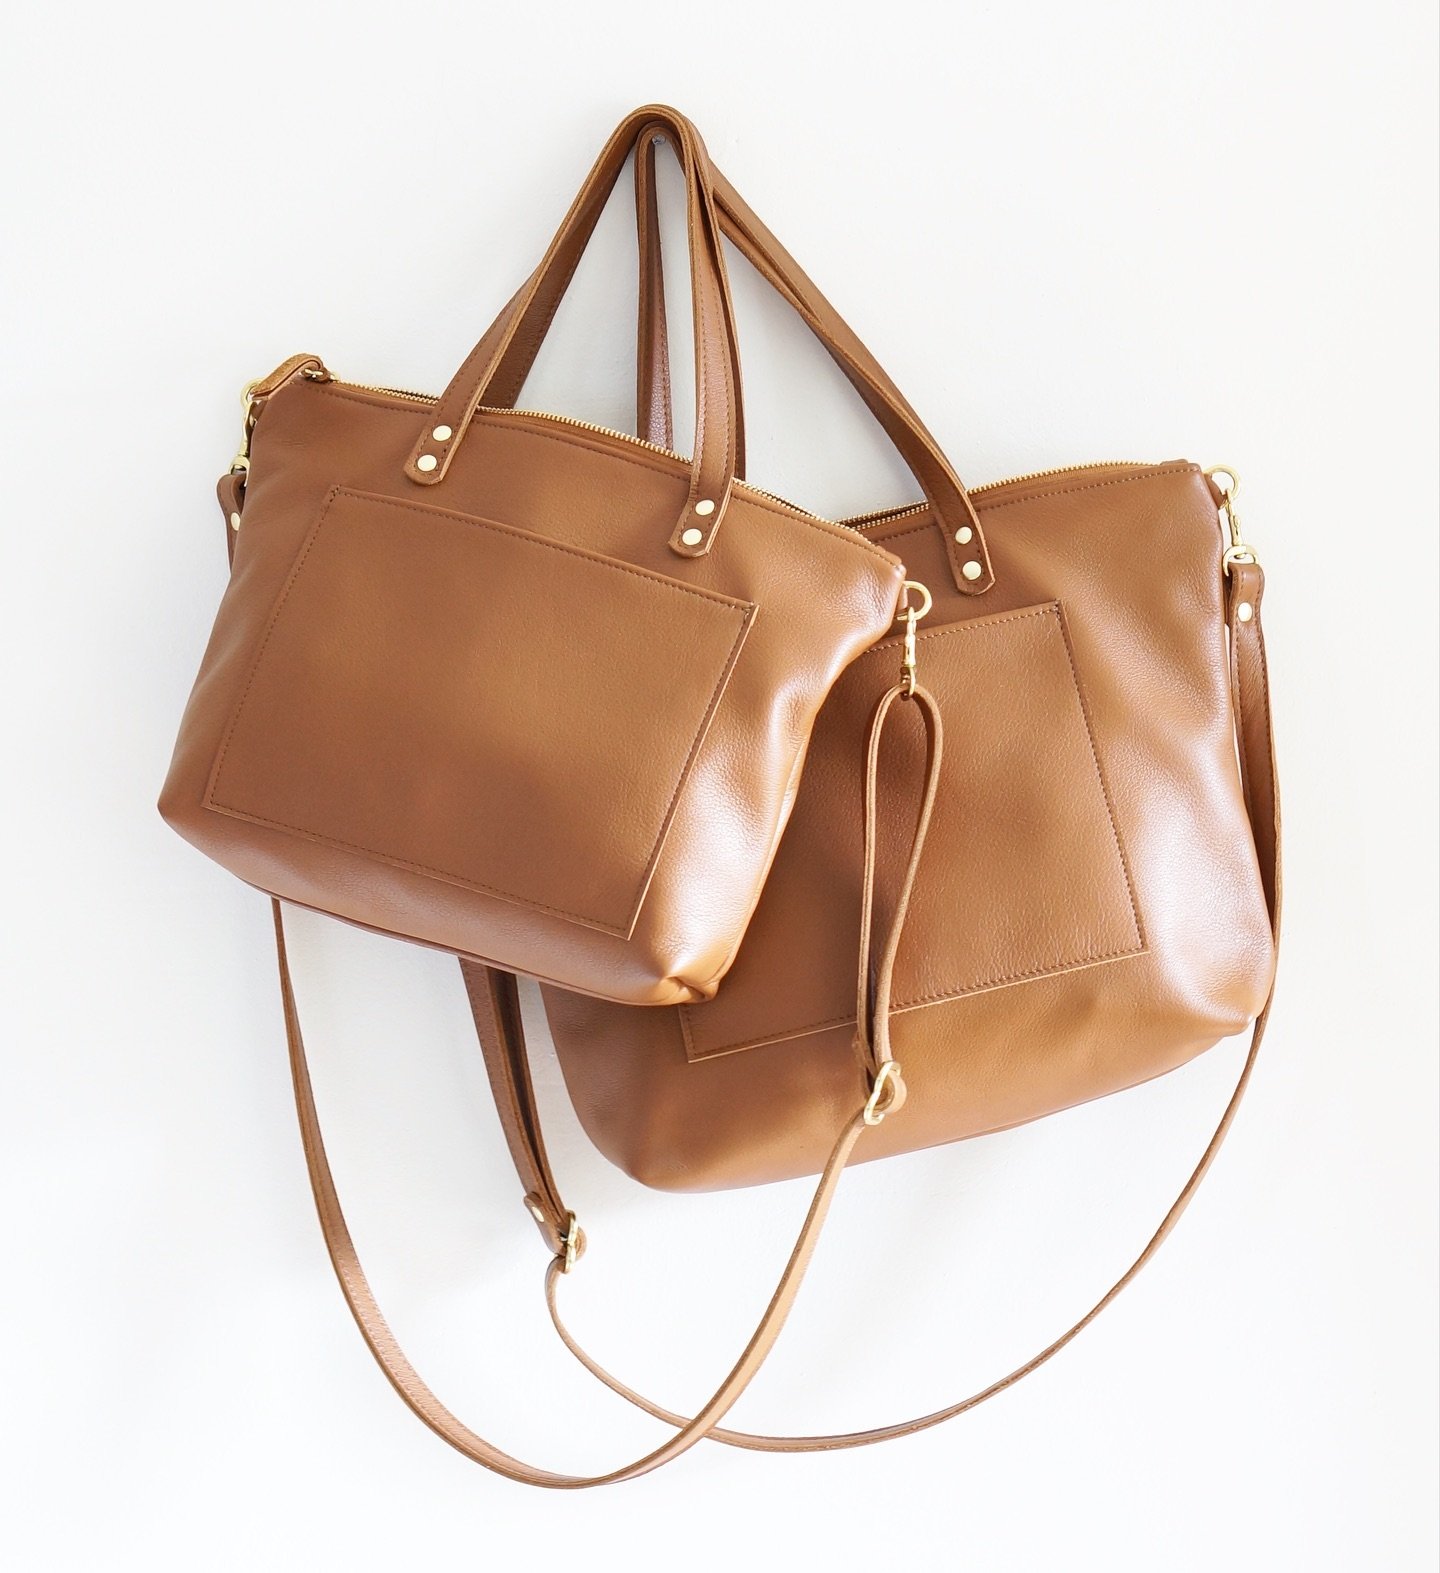 Mama and midi sized Day Bags in chocolate. What&rsquo;s your go-to size?